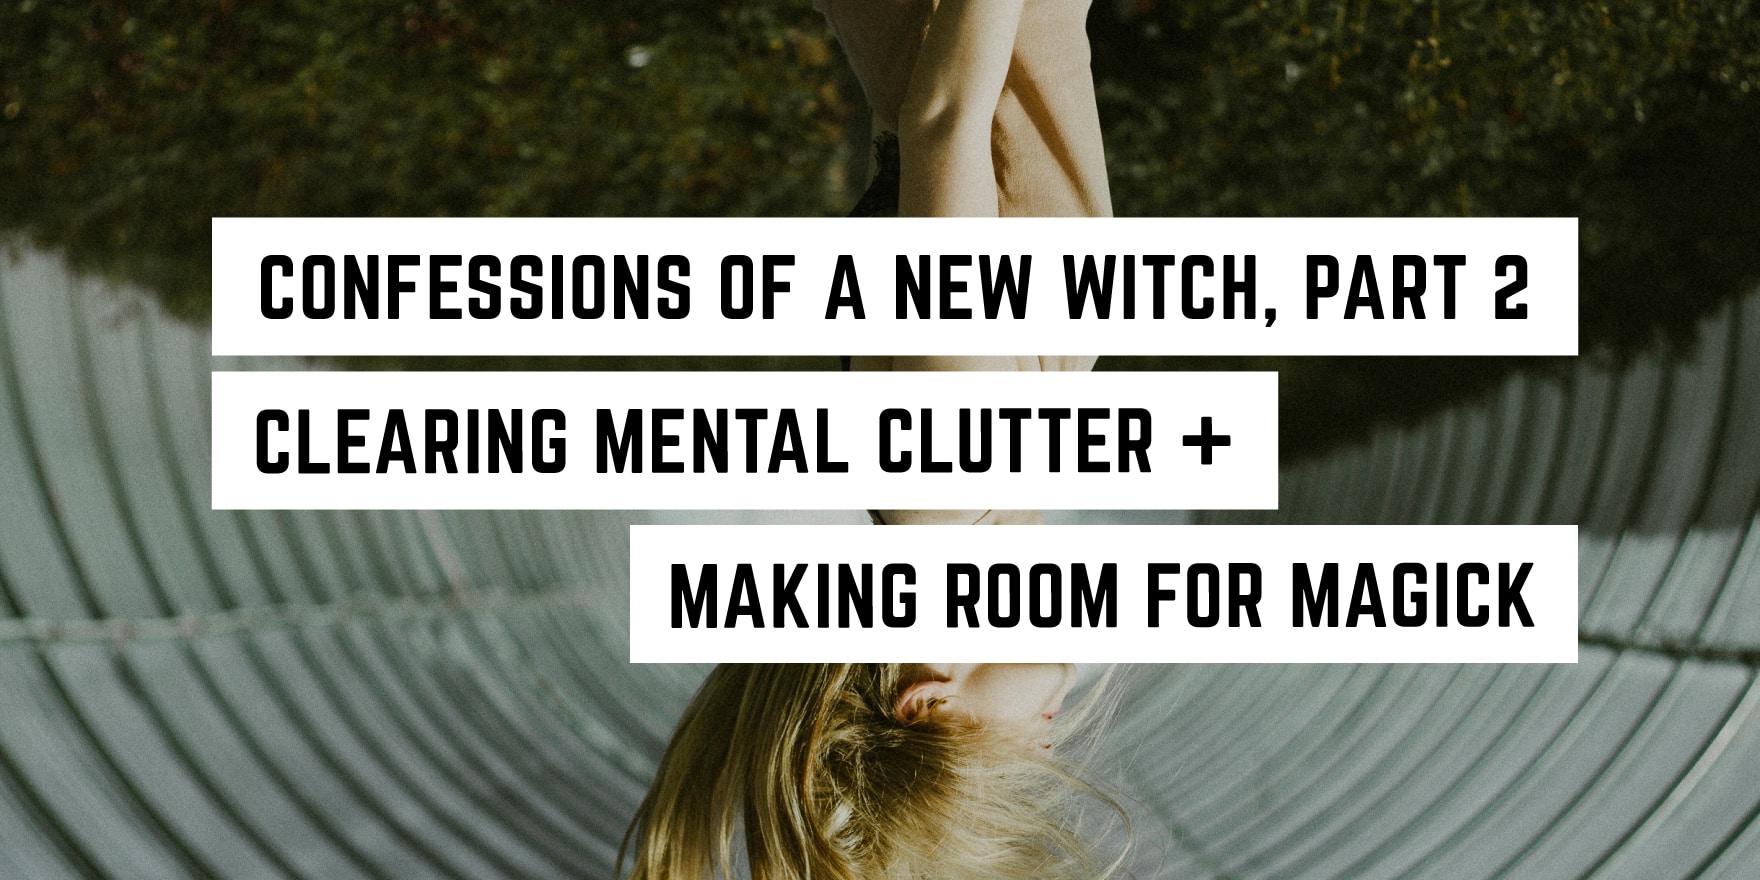 Finding balance and serenity: embracing the mystical, witchy journey.